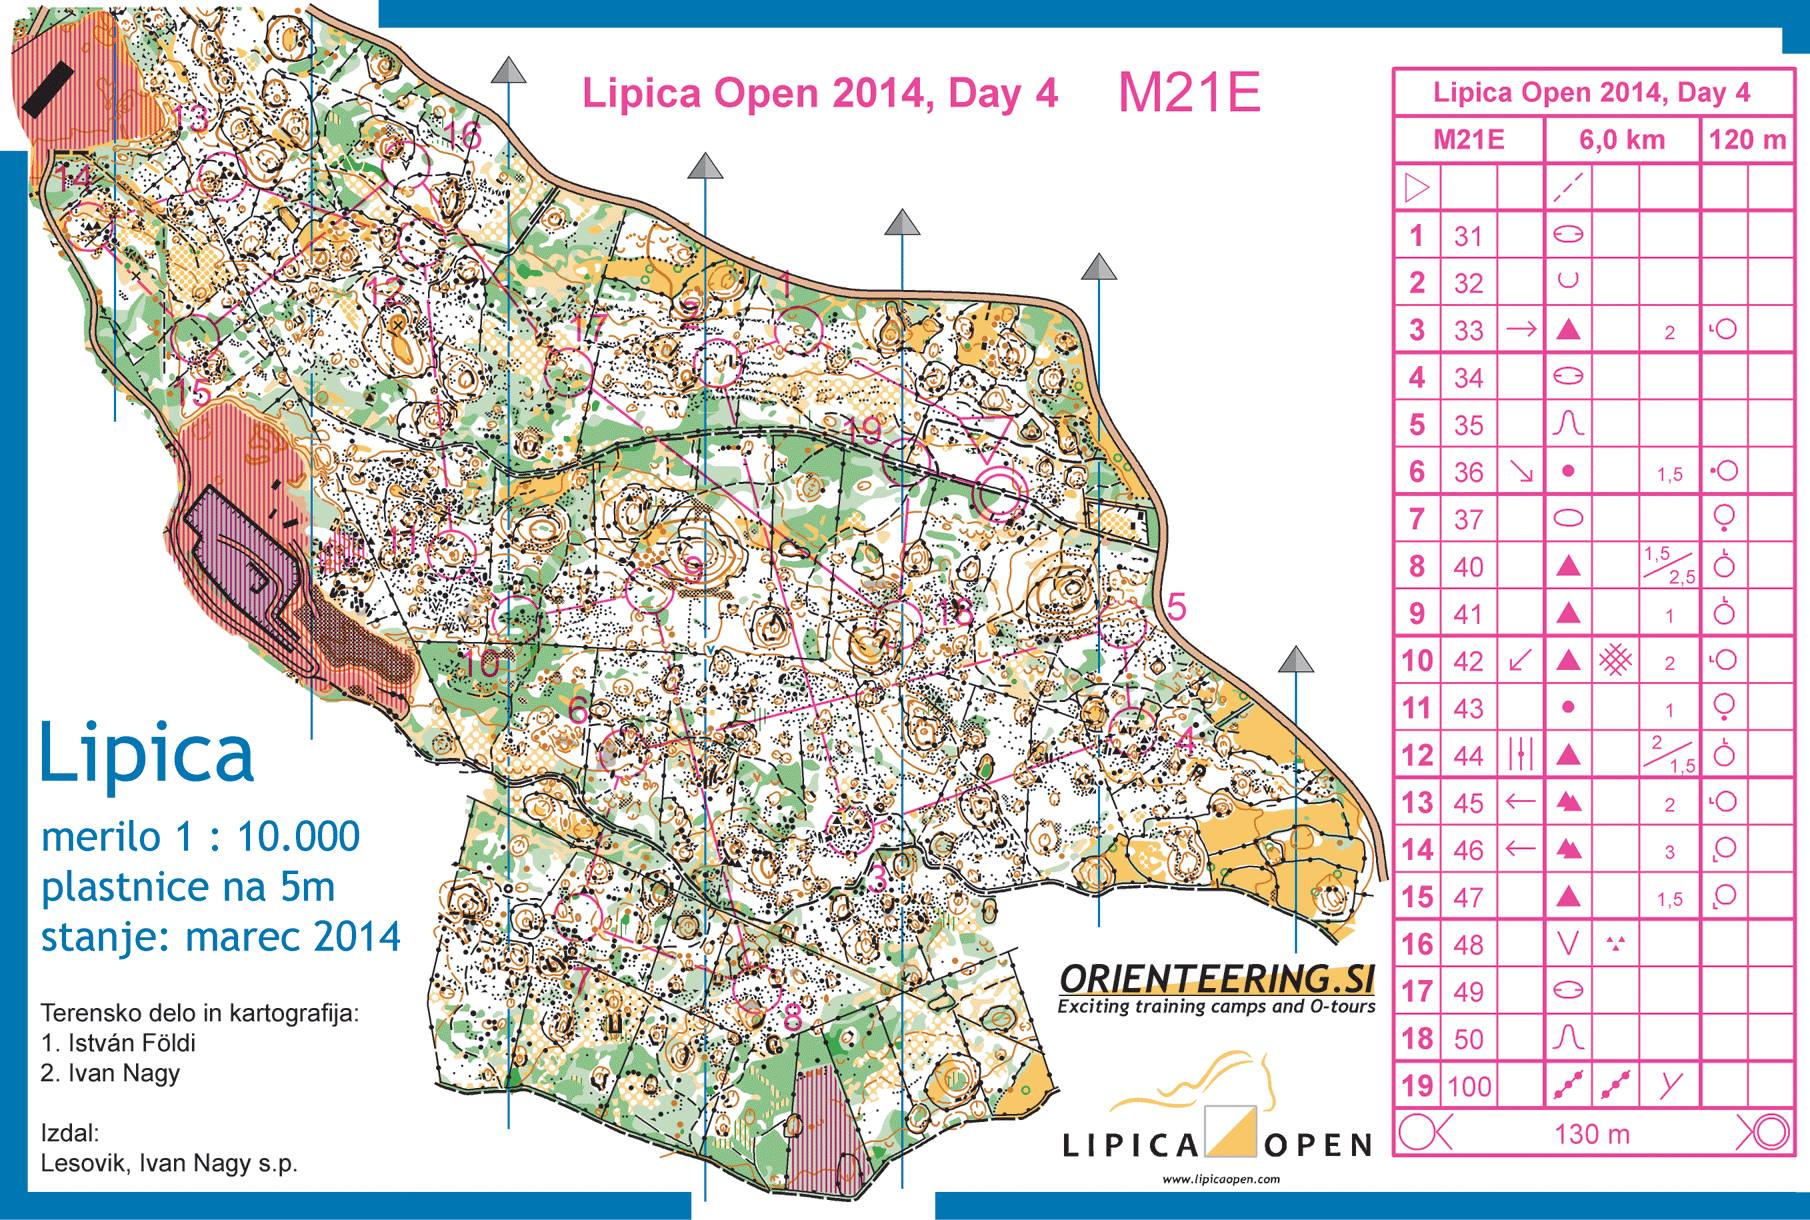 Lipica open - Stage 4 (11.03.2014)